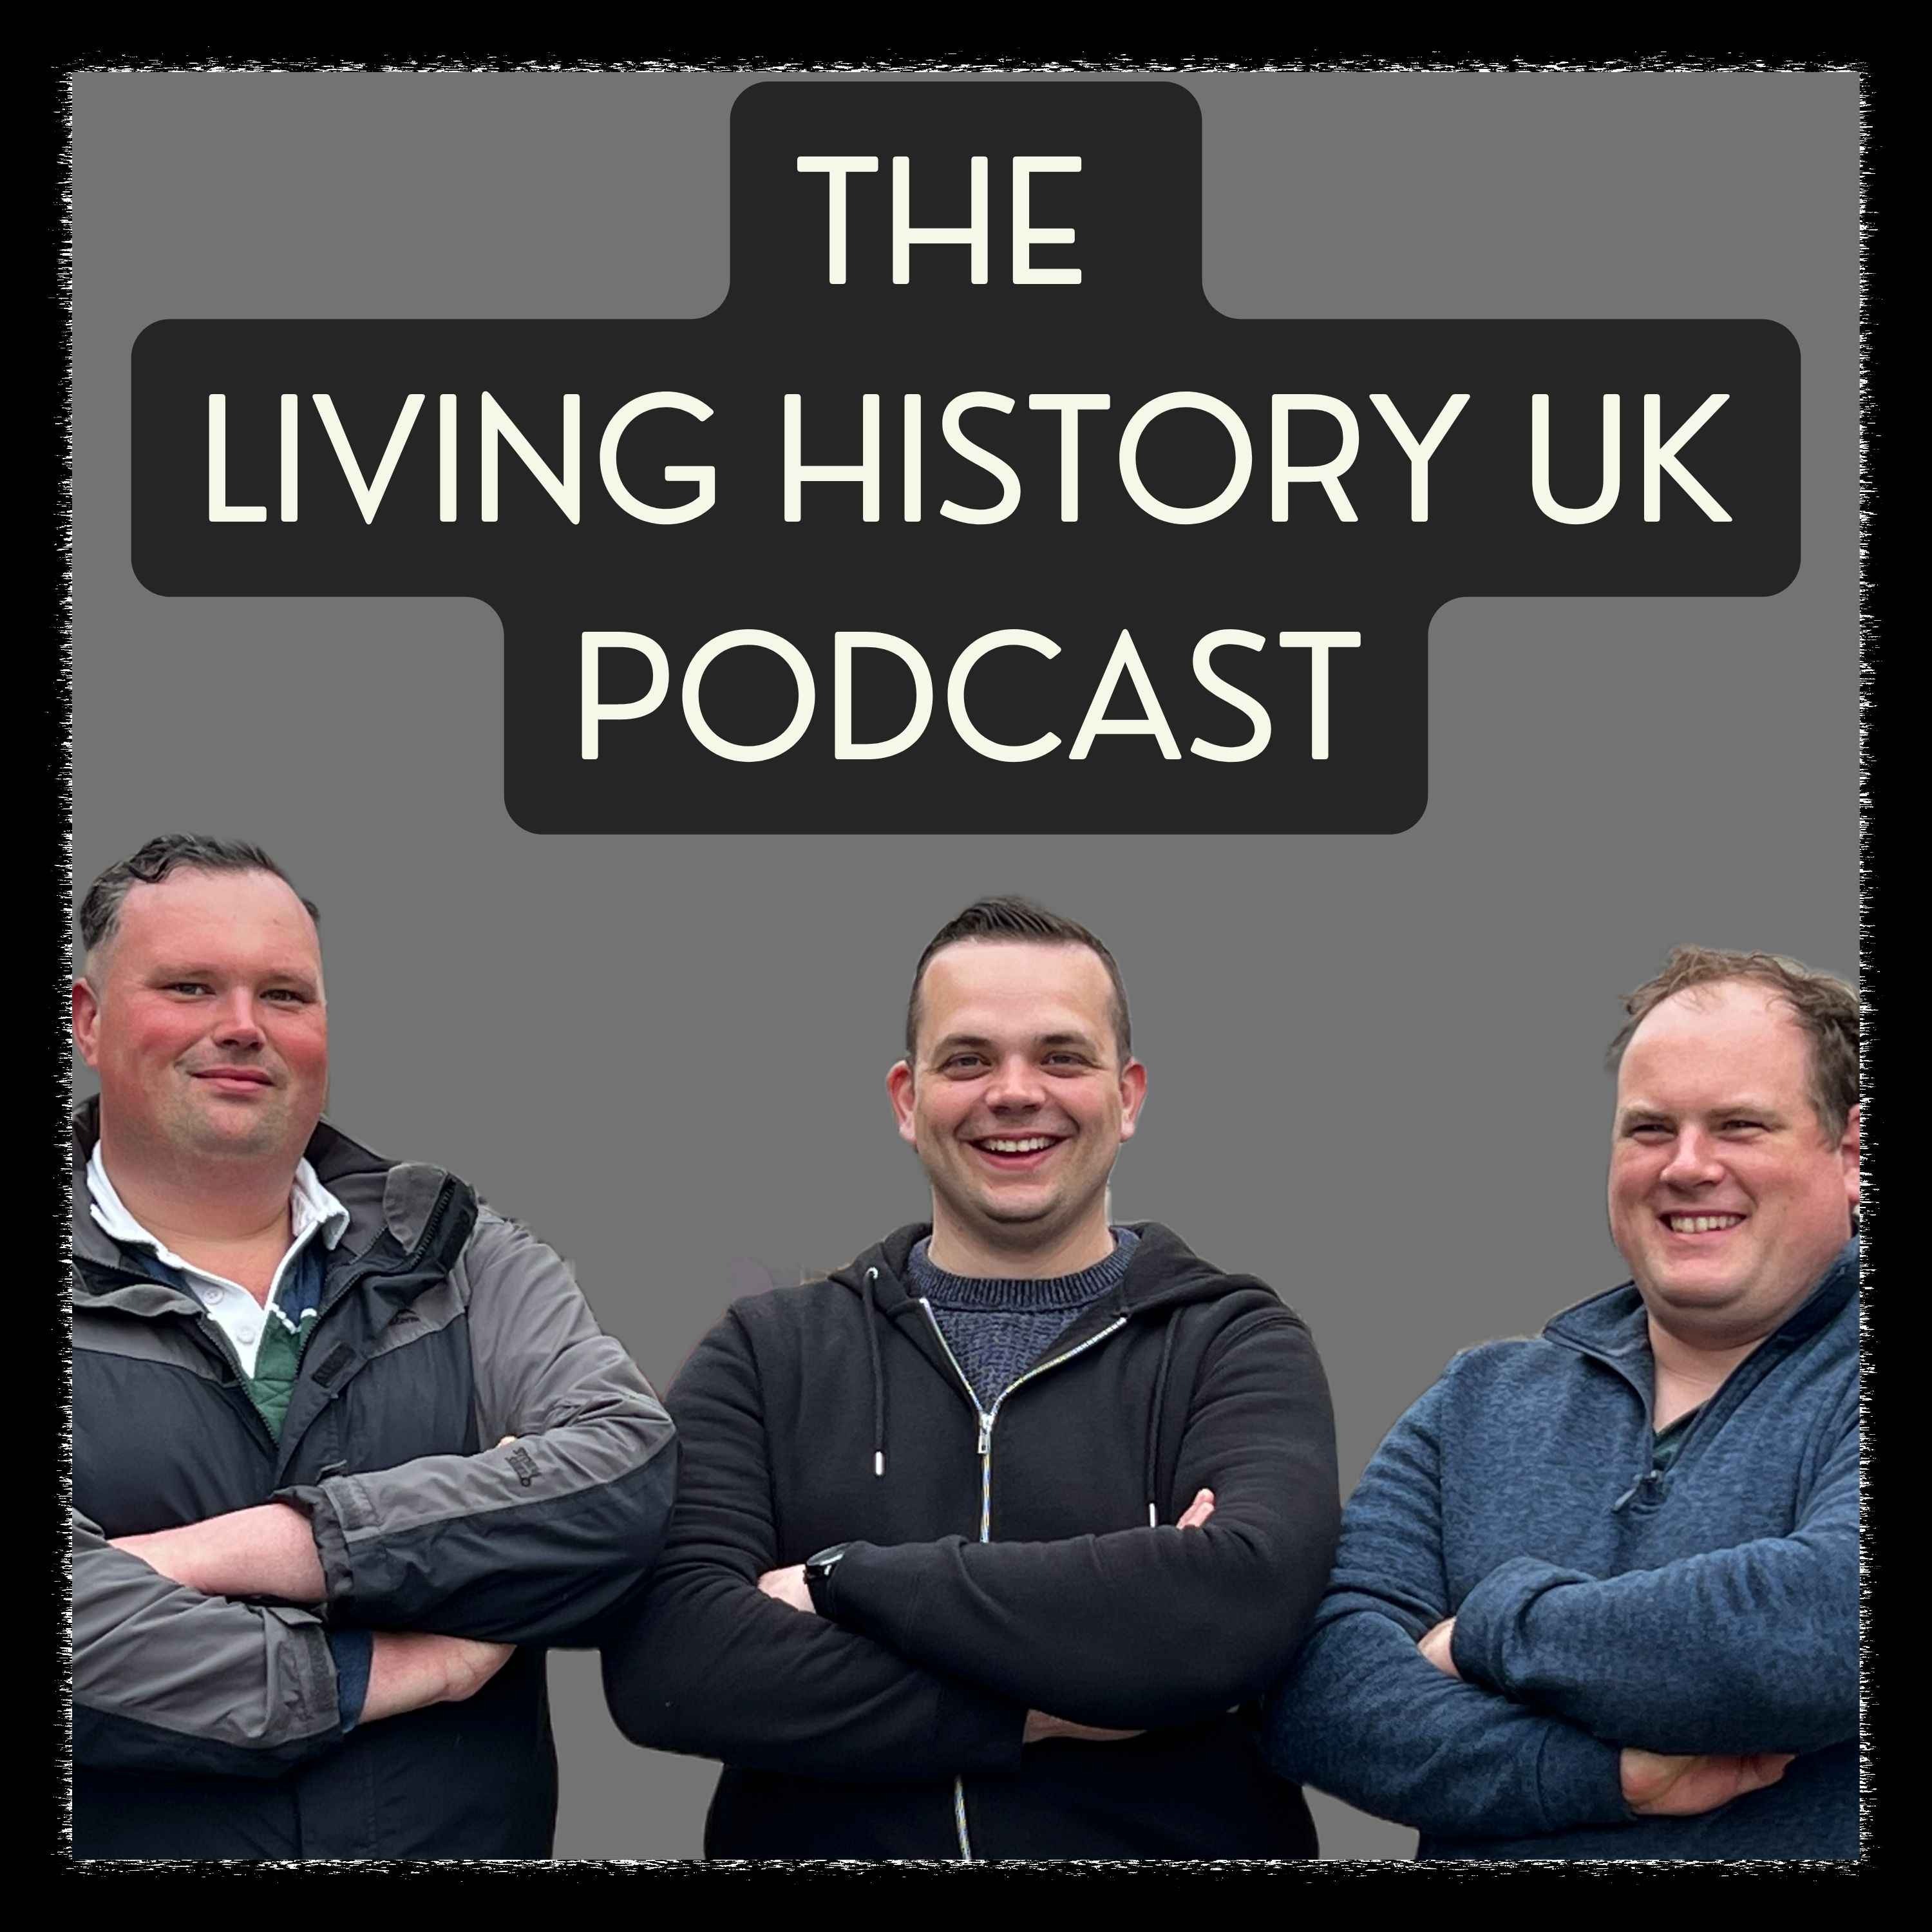 The Living History UK Podcast